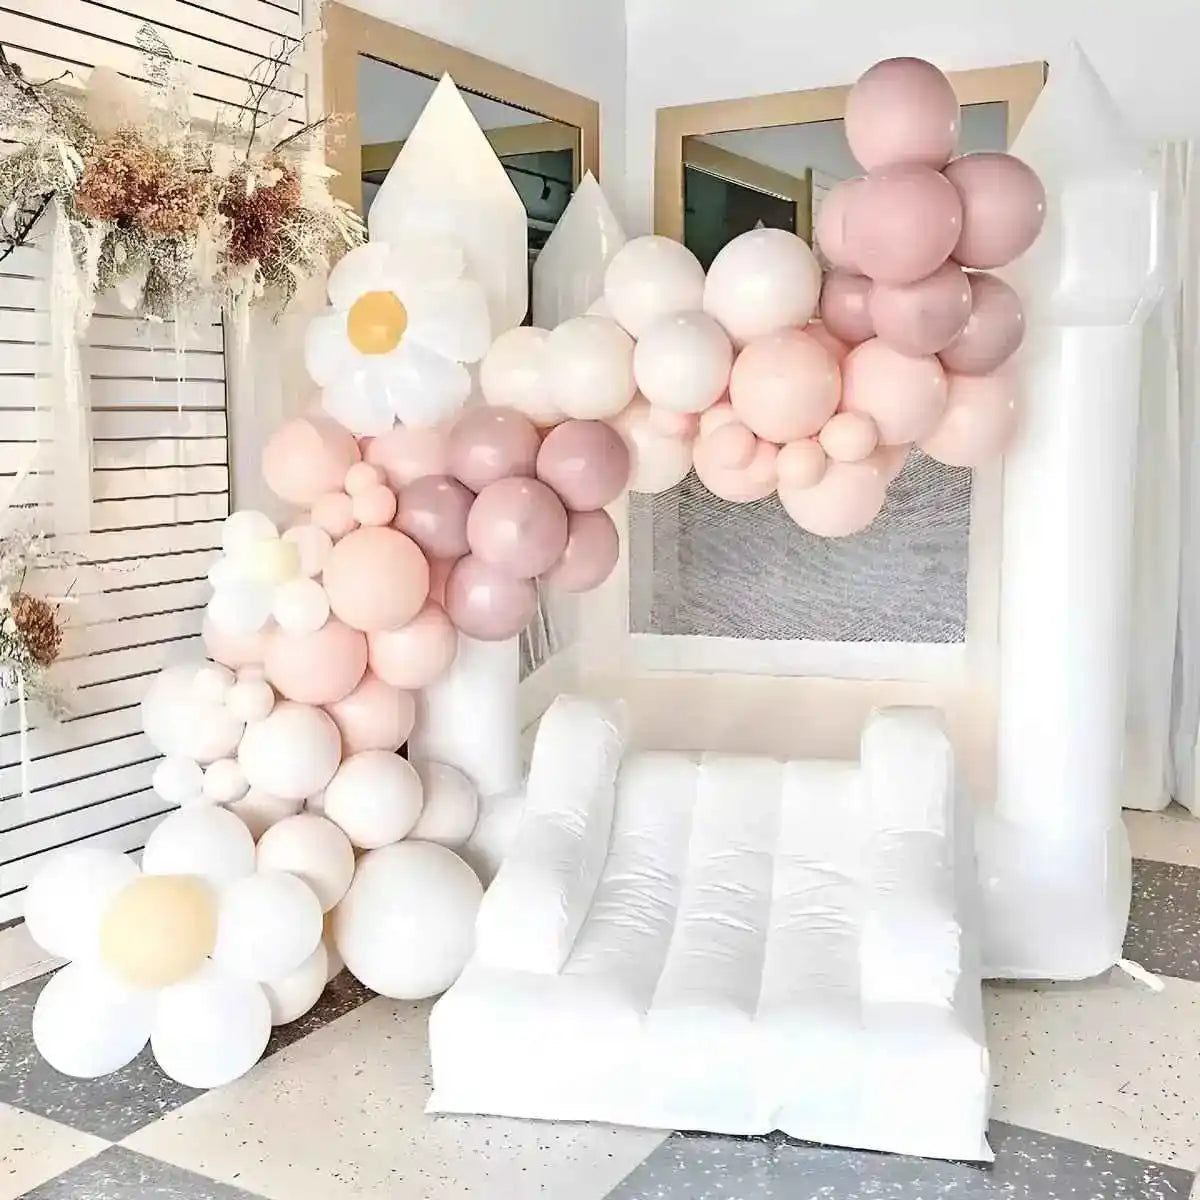 The Mini Bounce, mini white bounce house, decorated with pink balloons for party.